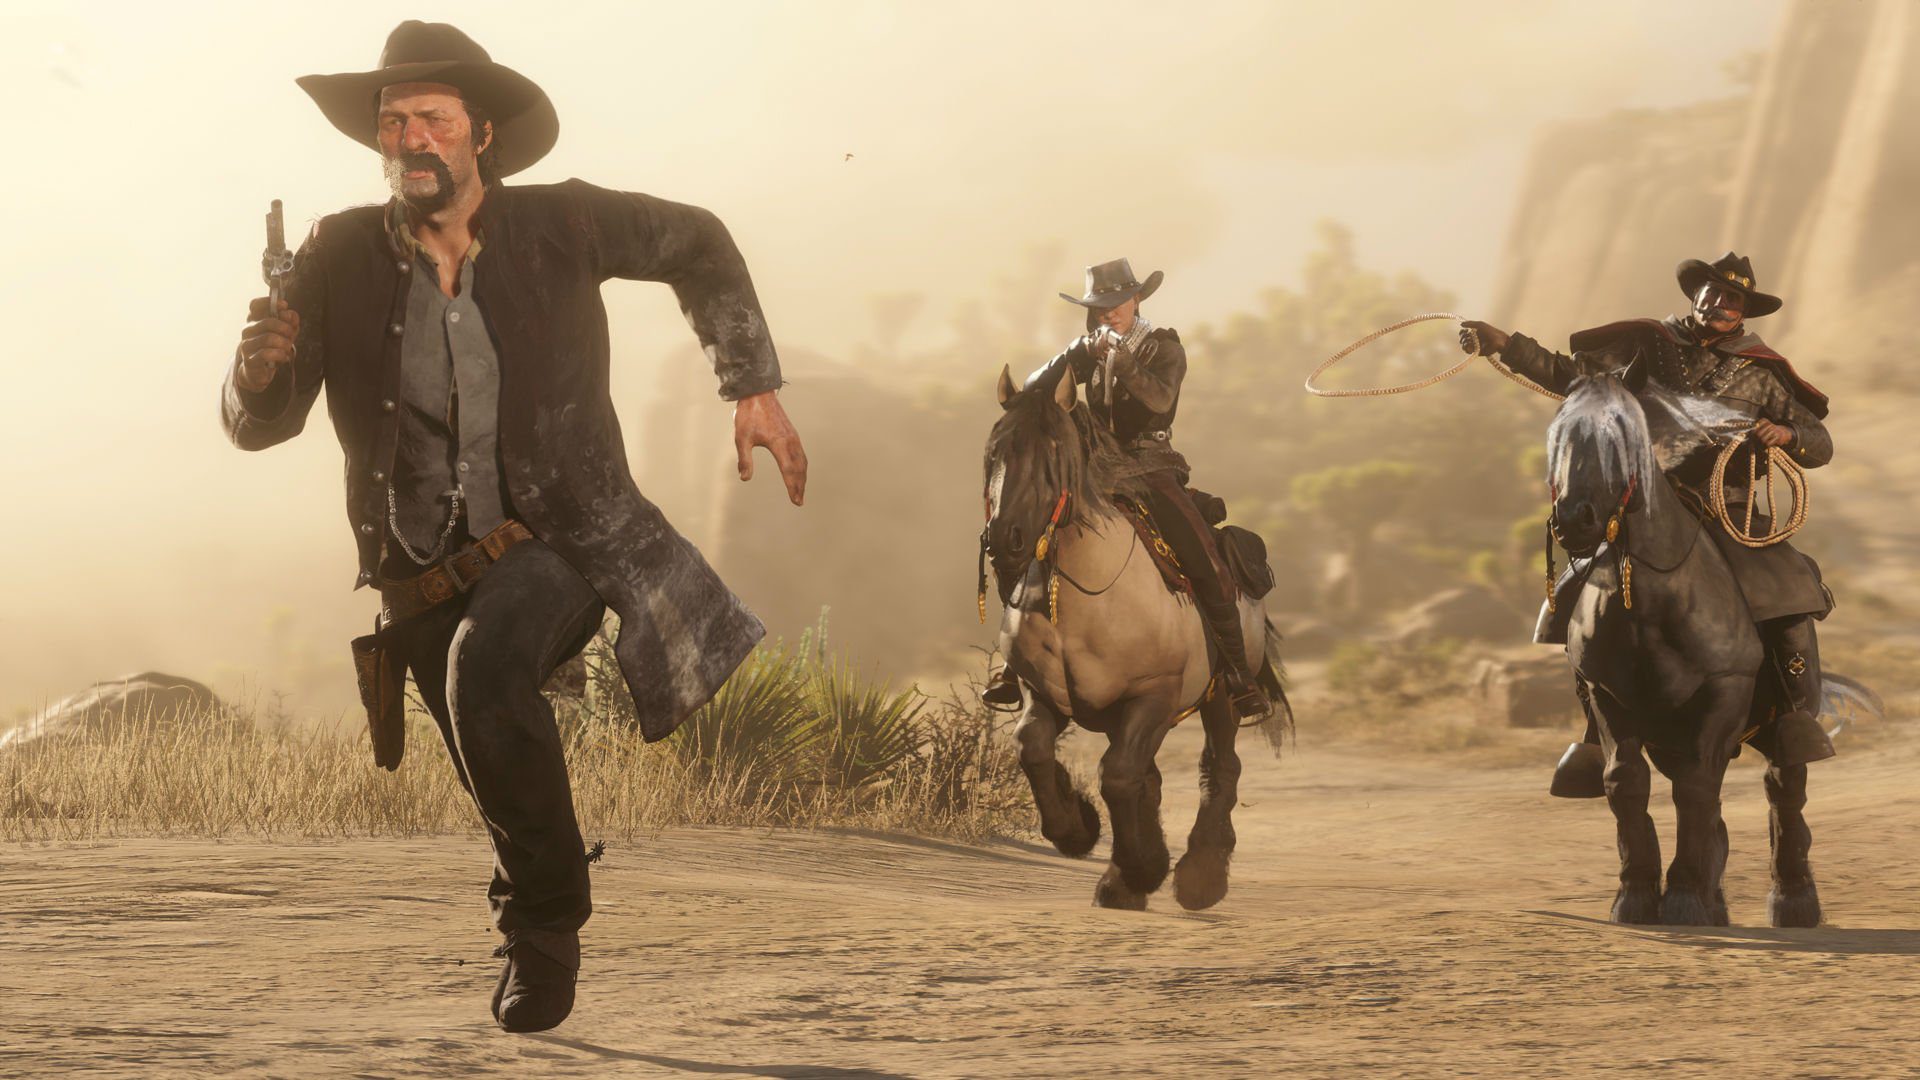 Red Dead Online now available as a separate game for $5